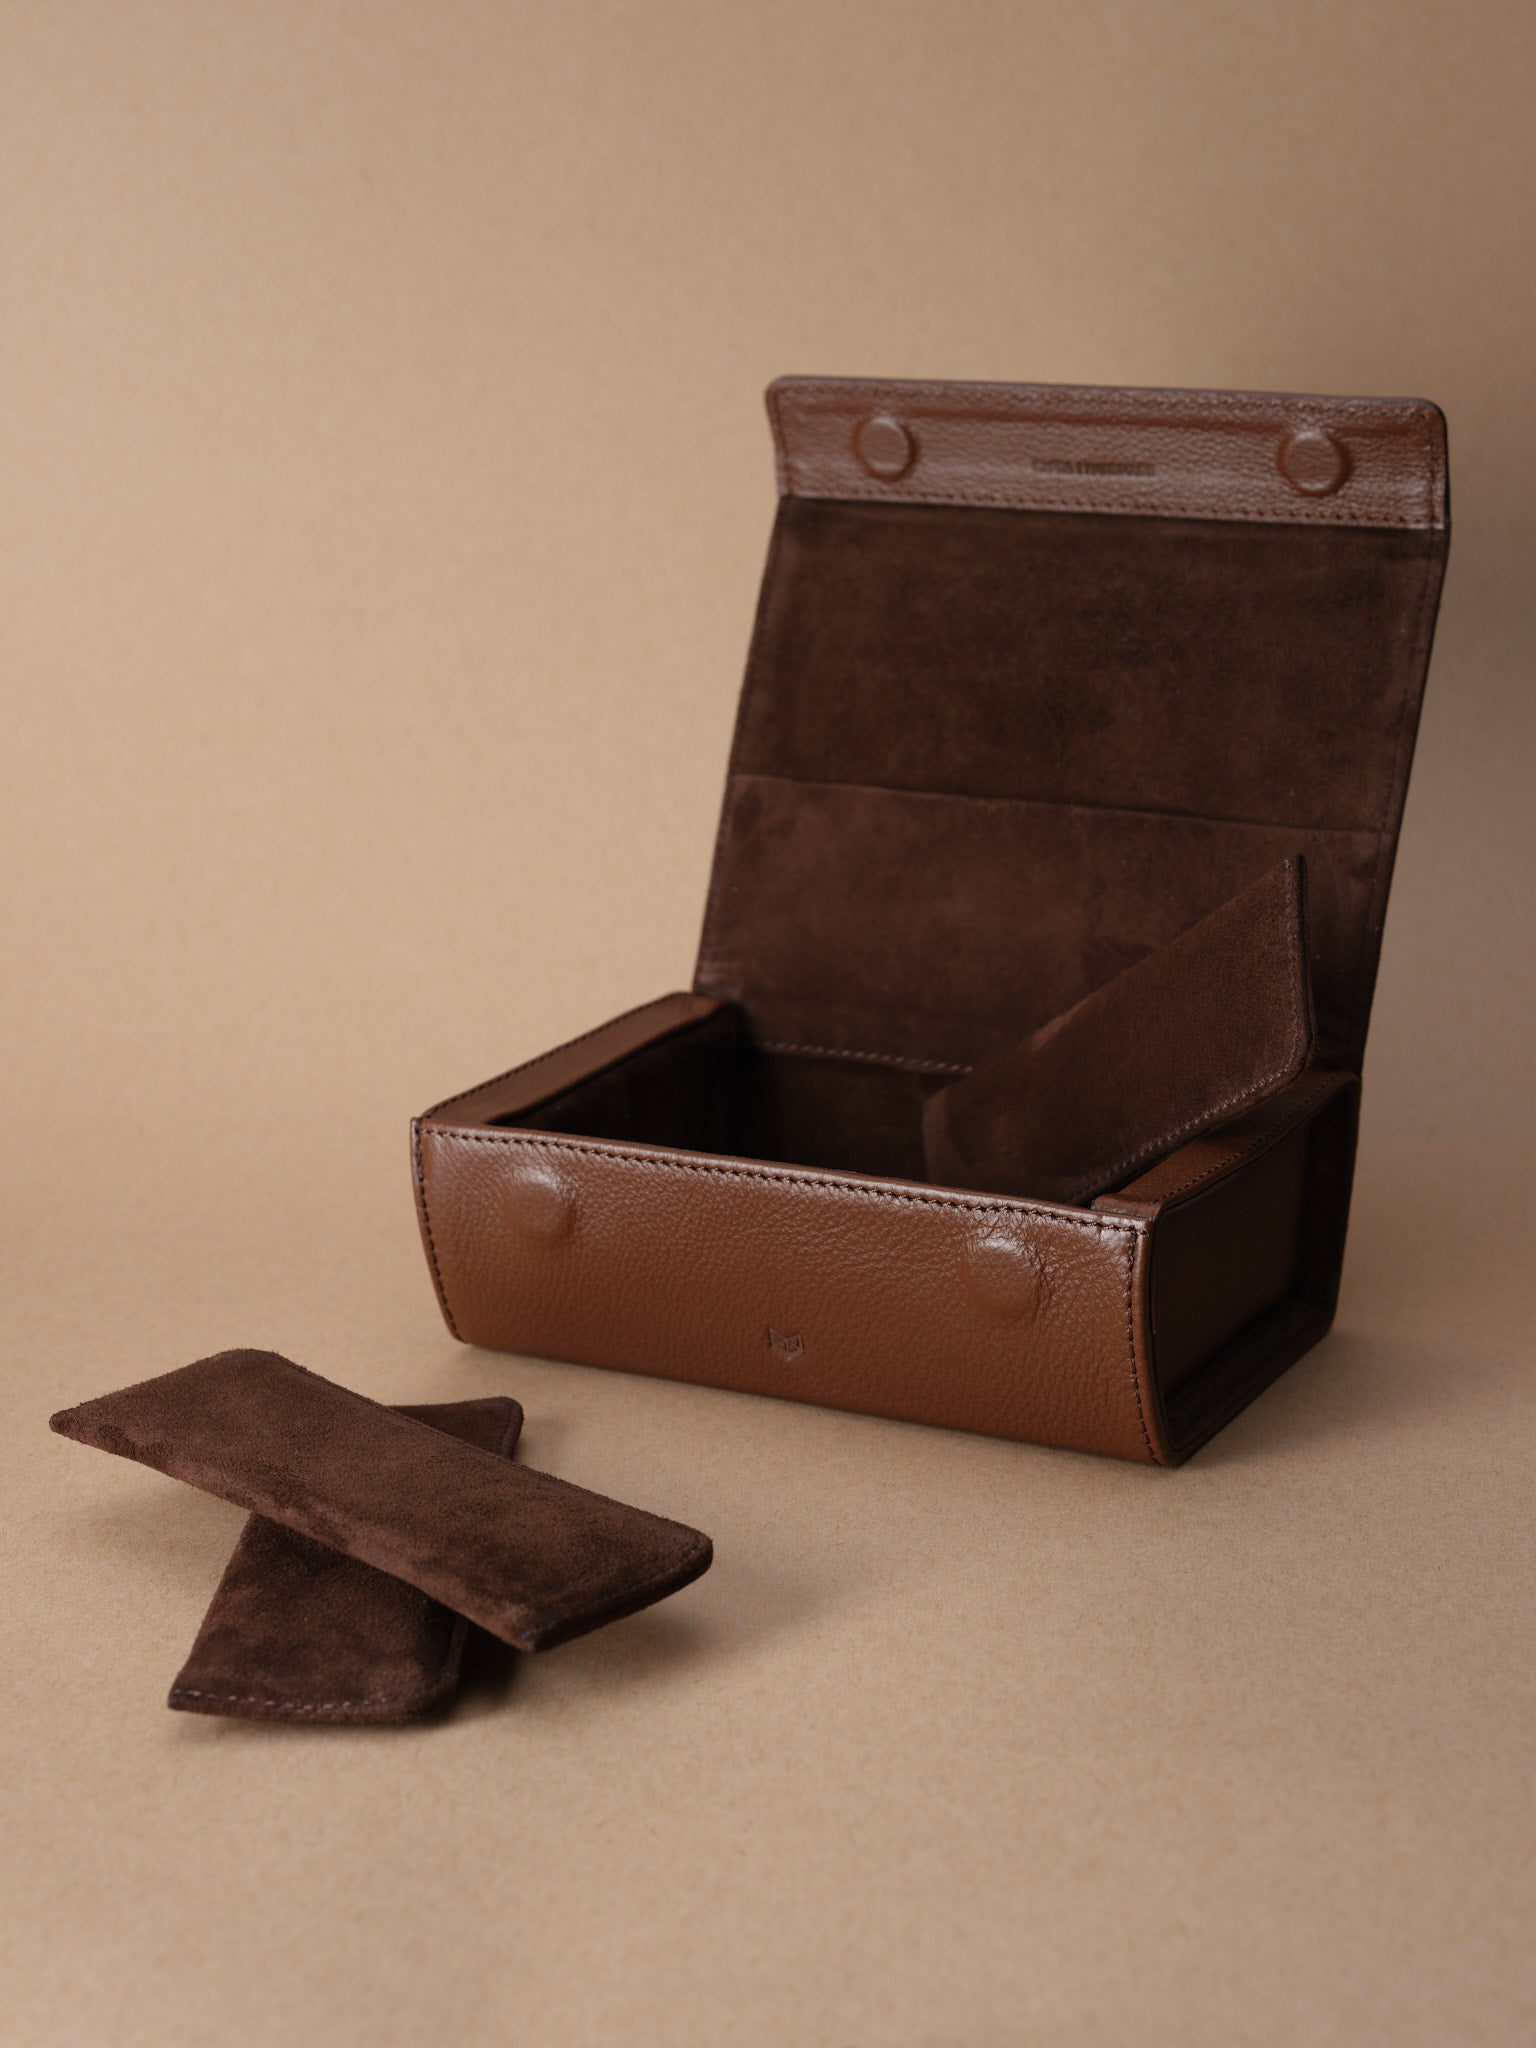 multiple sunglasses case brown by Capra Leather